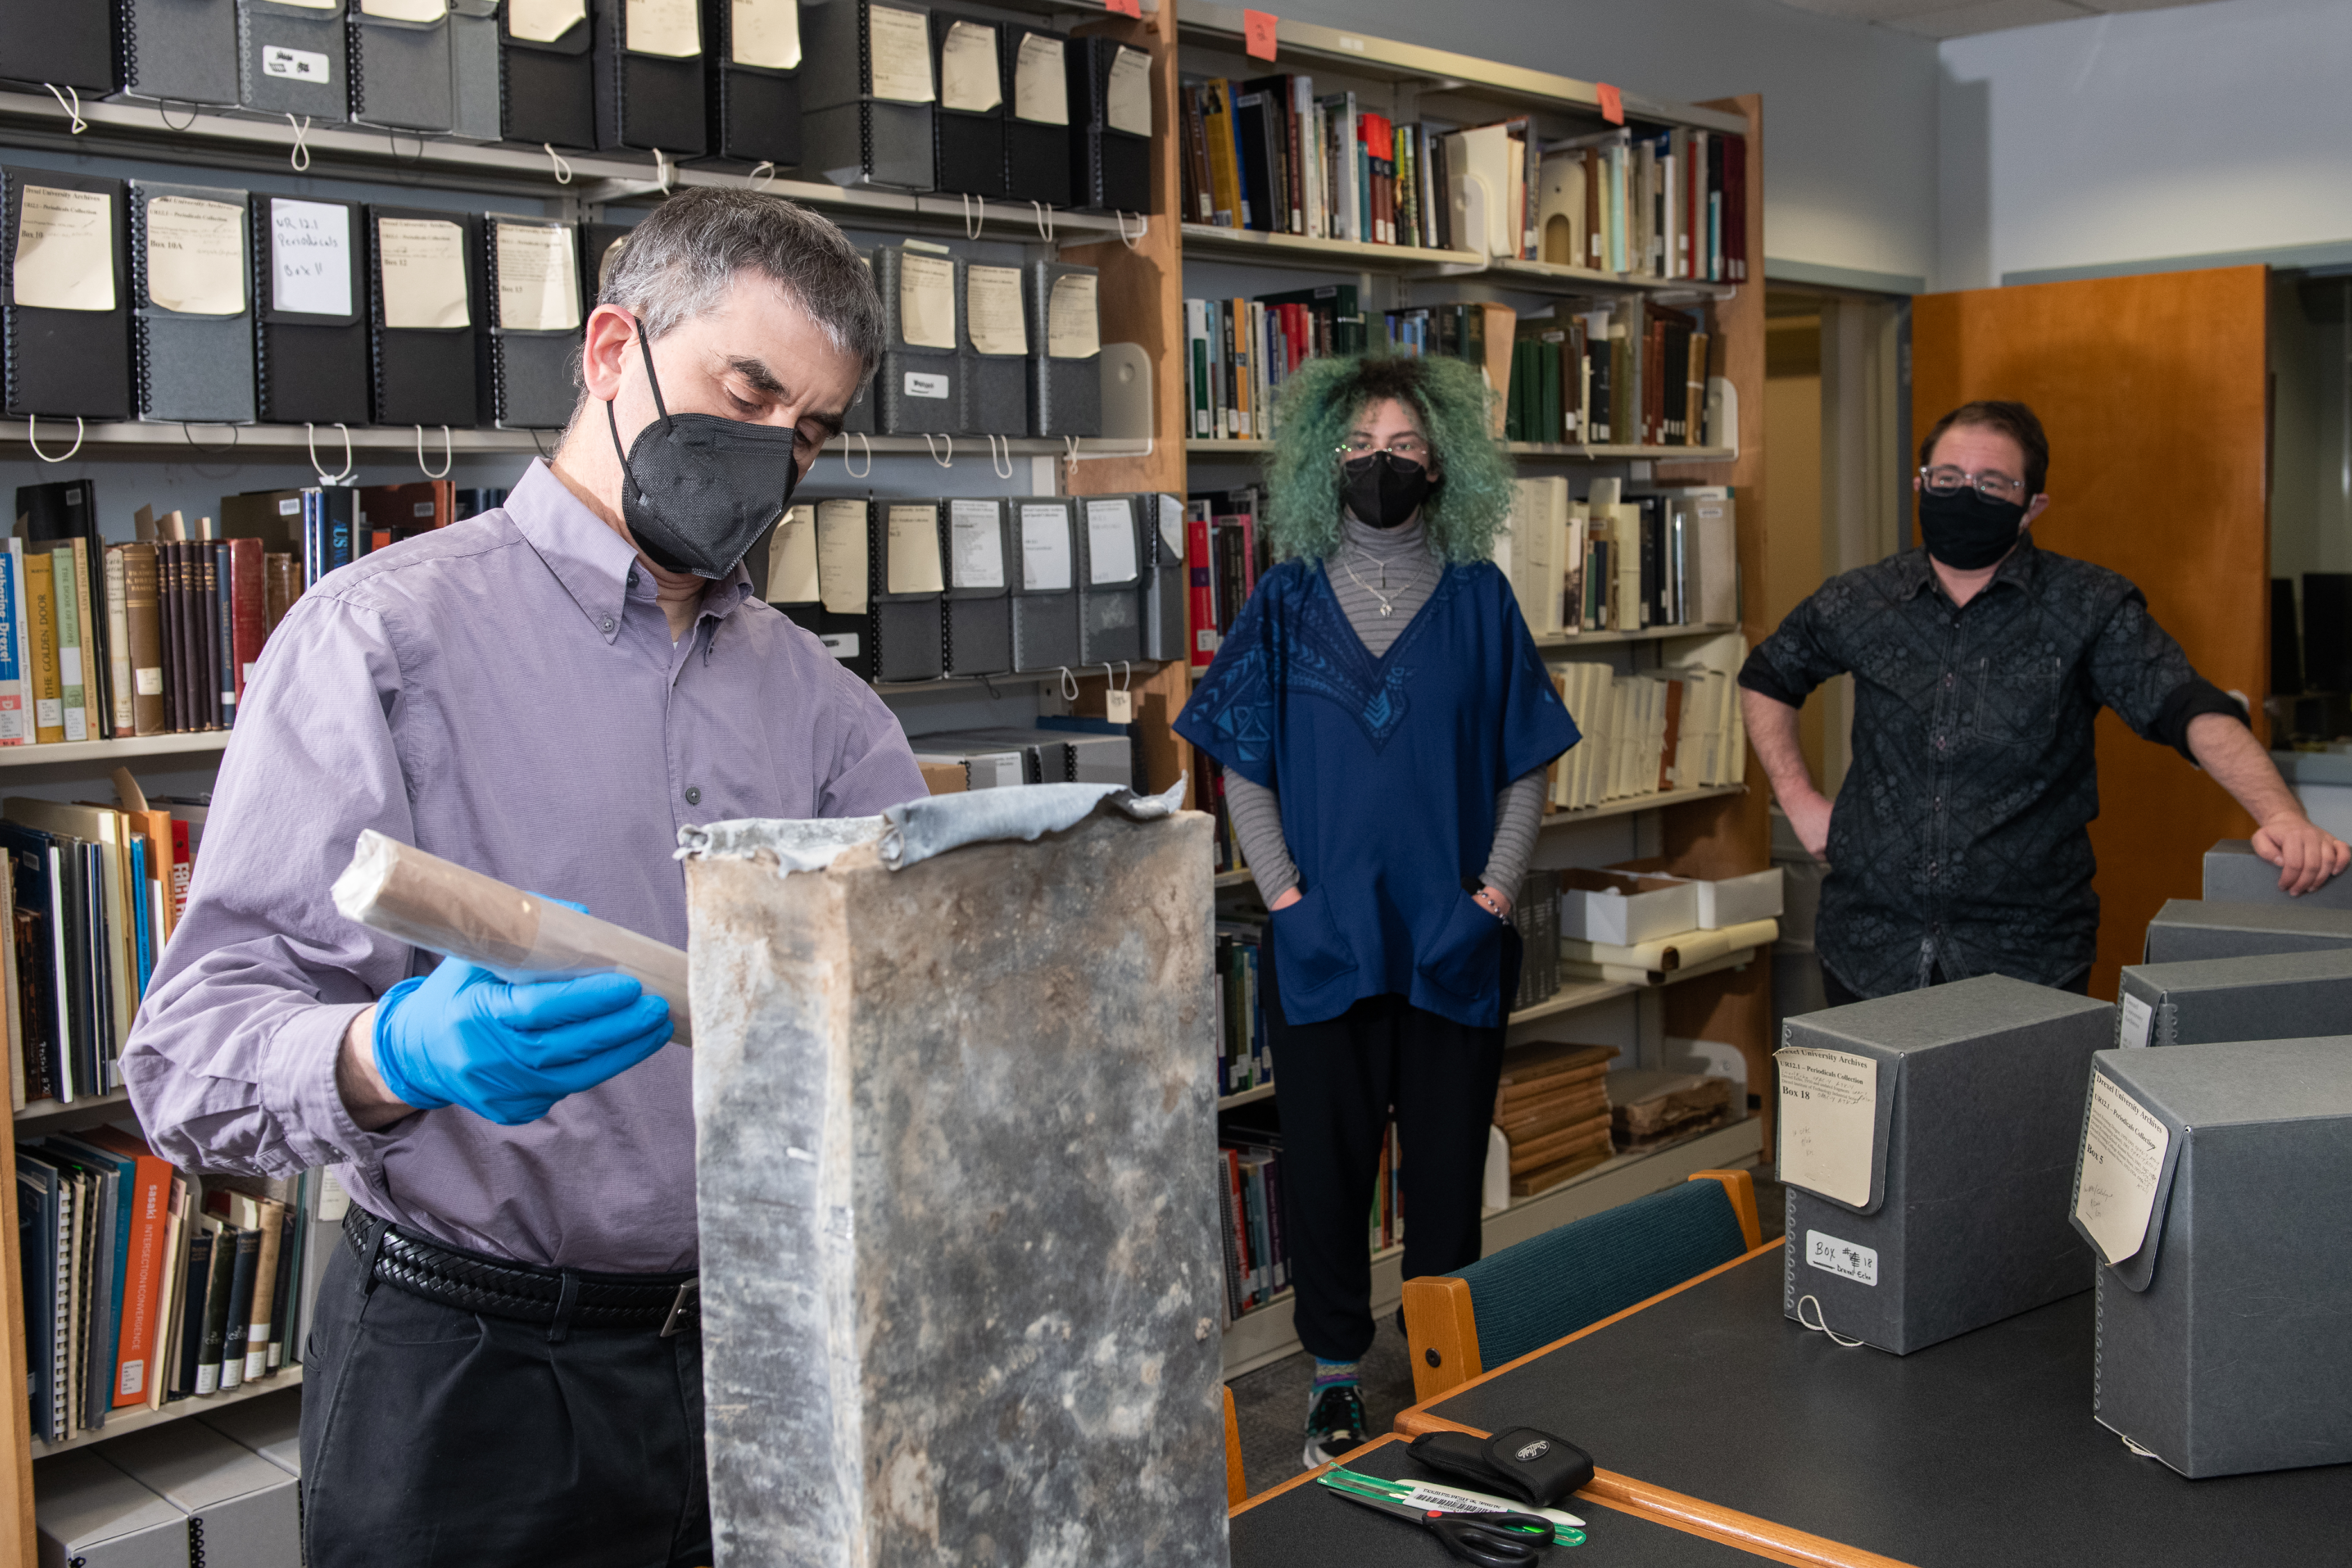 University Archives staff open the time capsule. From left to right: Archivist Matthew Lyons, former Archives Co-Op Hanna Pistorius, and Archivist Simon Ragovin